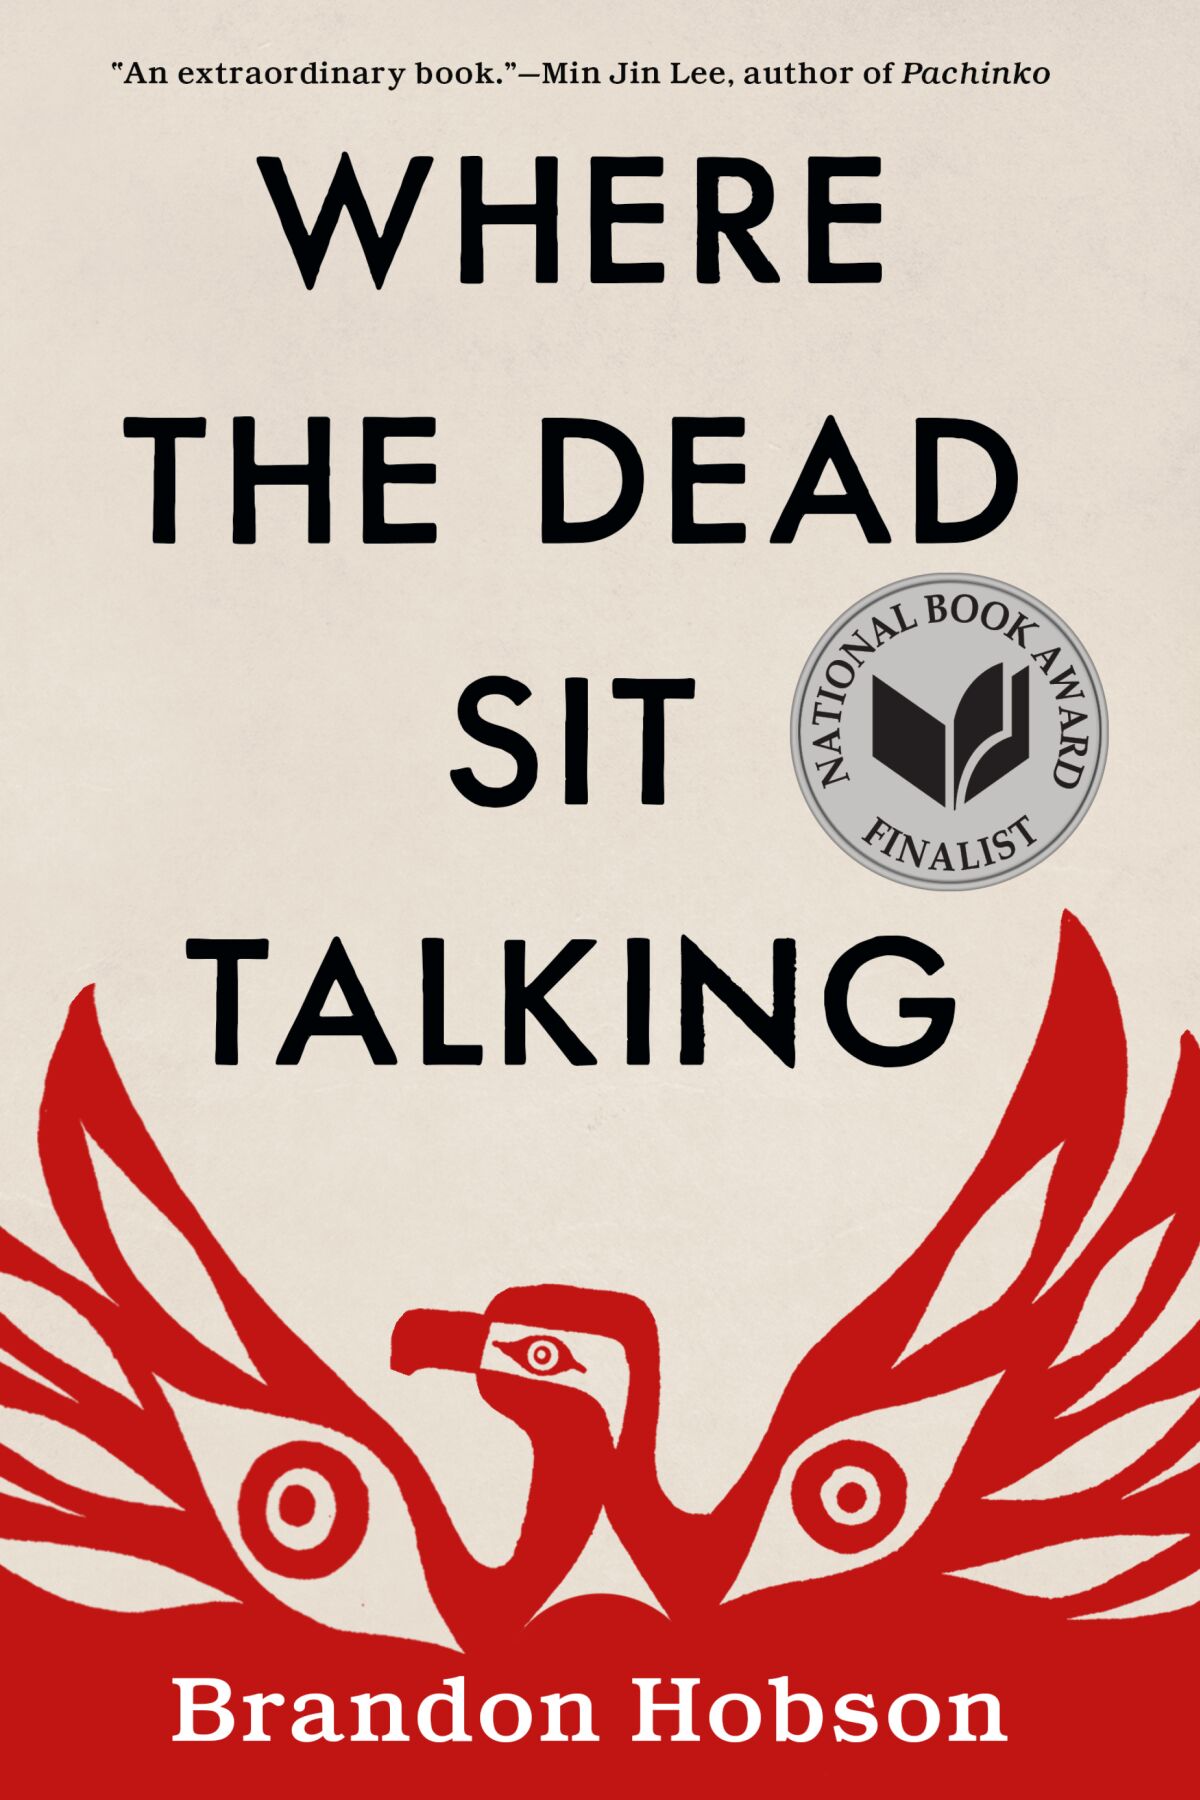 "Where the Dead Sit Talking" by Brandon Hobson.